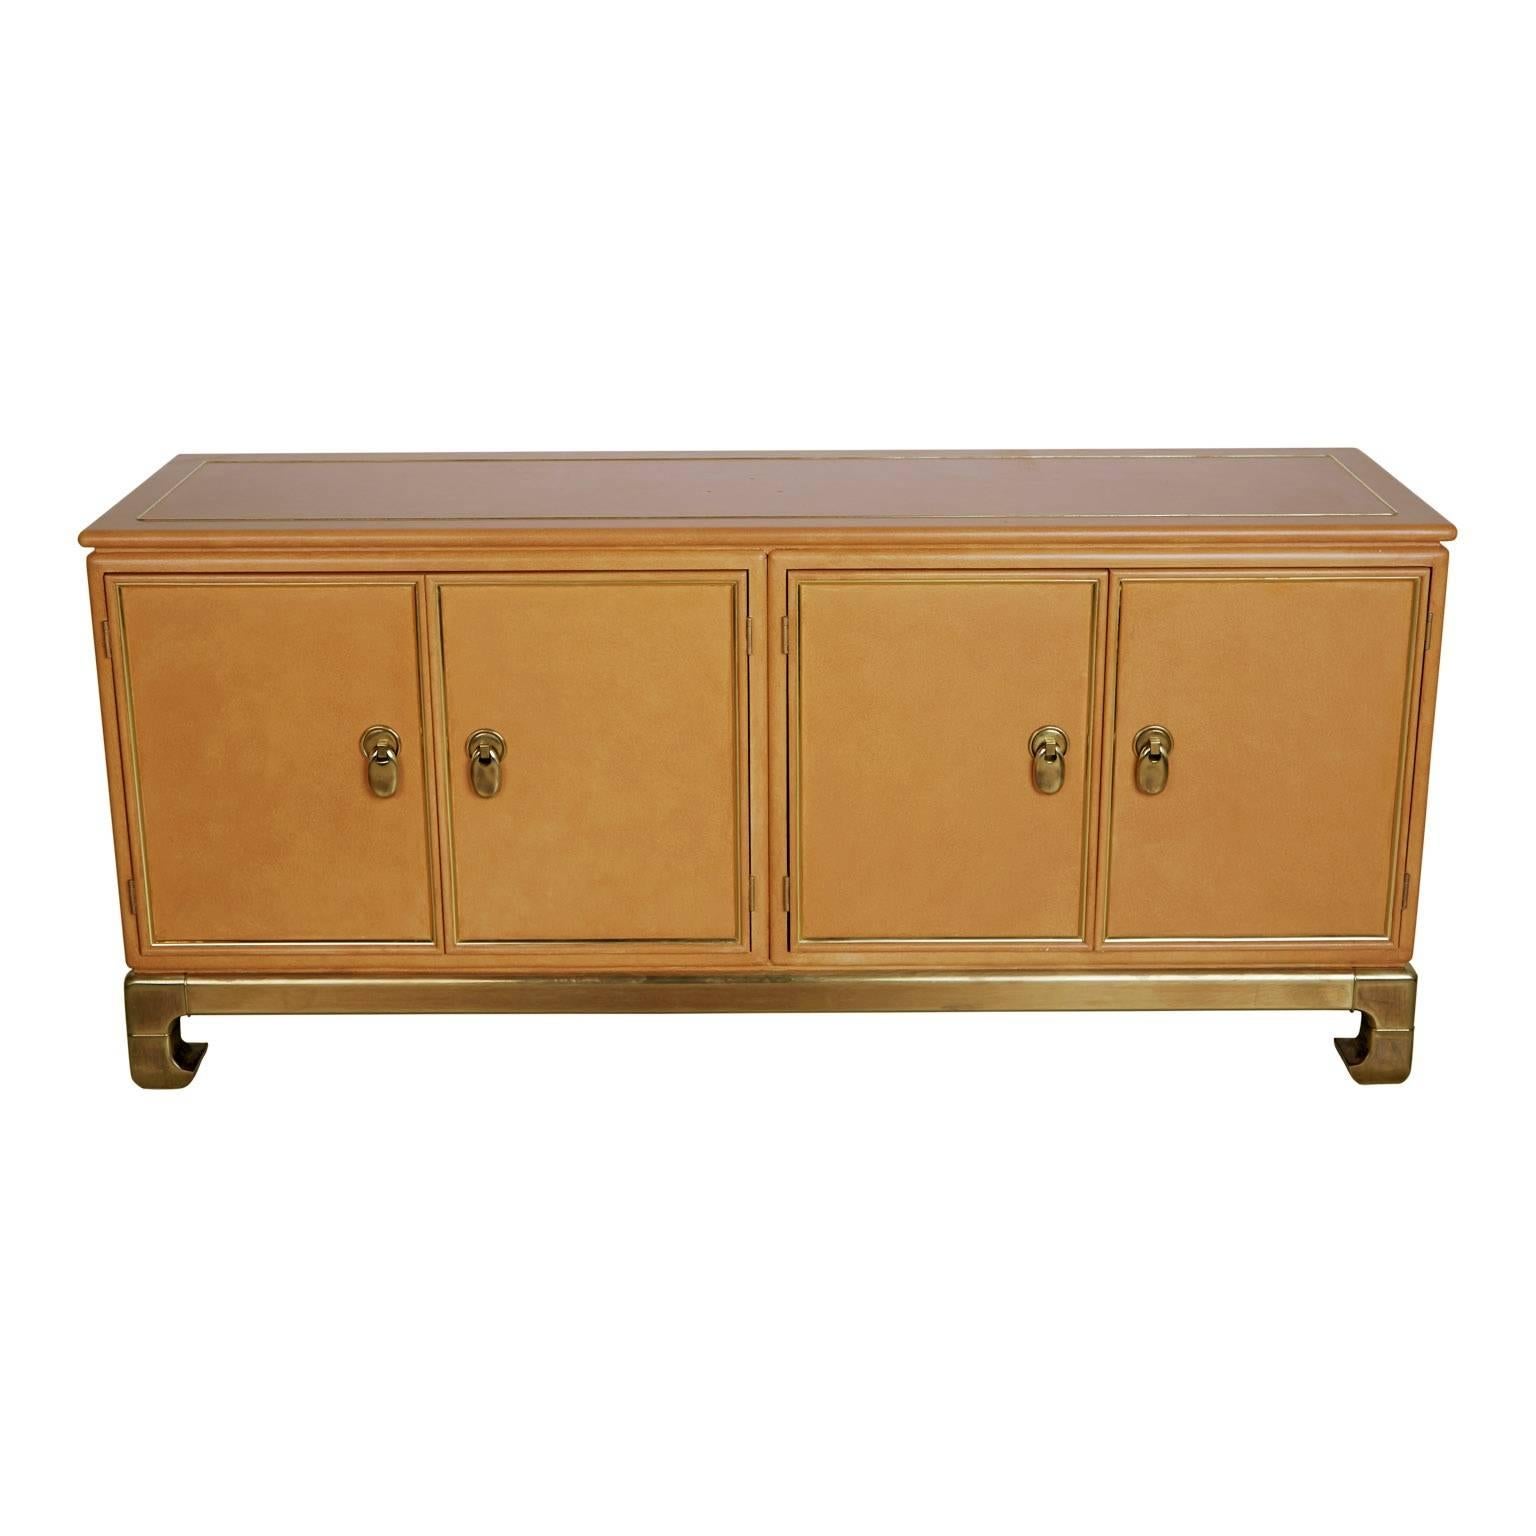 Stunning hefty and substantial custom ordered credenza from Mastercraft. This gorgeous piece features a lacquered faux ostrich skin top over wood with embossed patterned border, sturdy luminescent on-trend brass base and Asian inspired hardware.